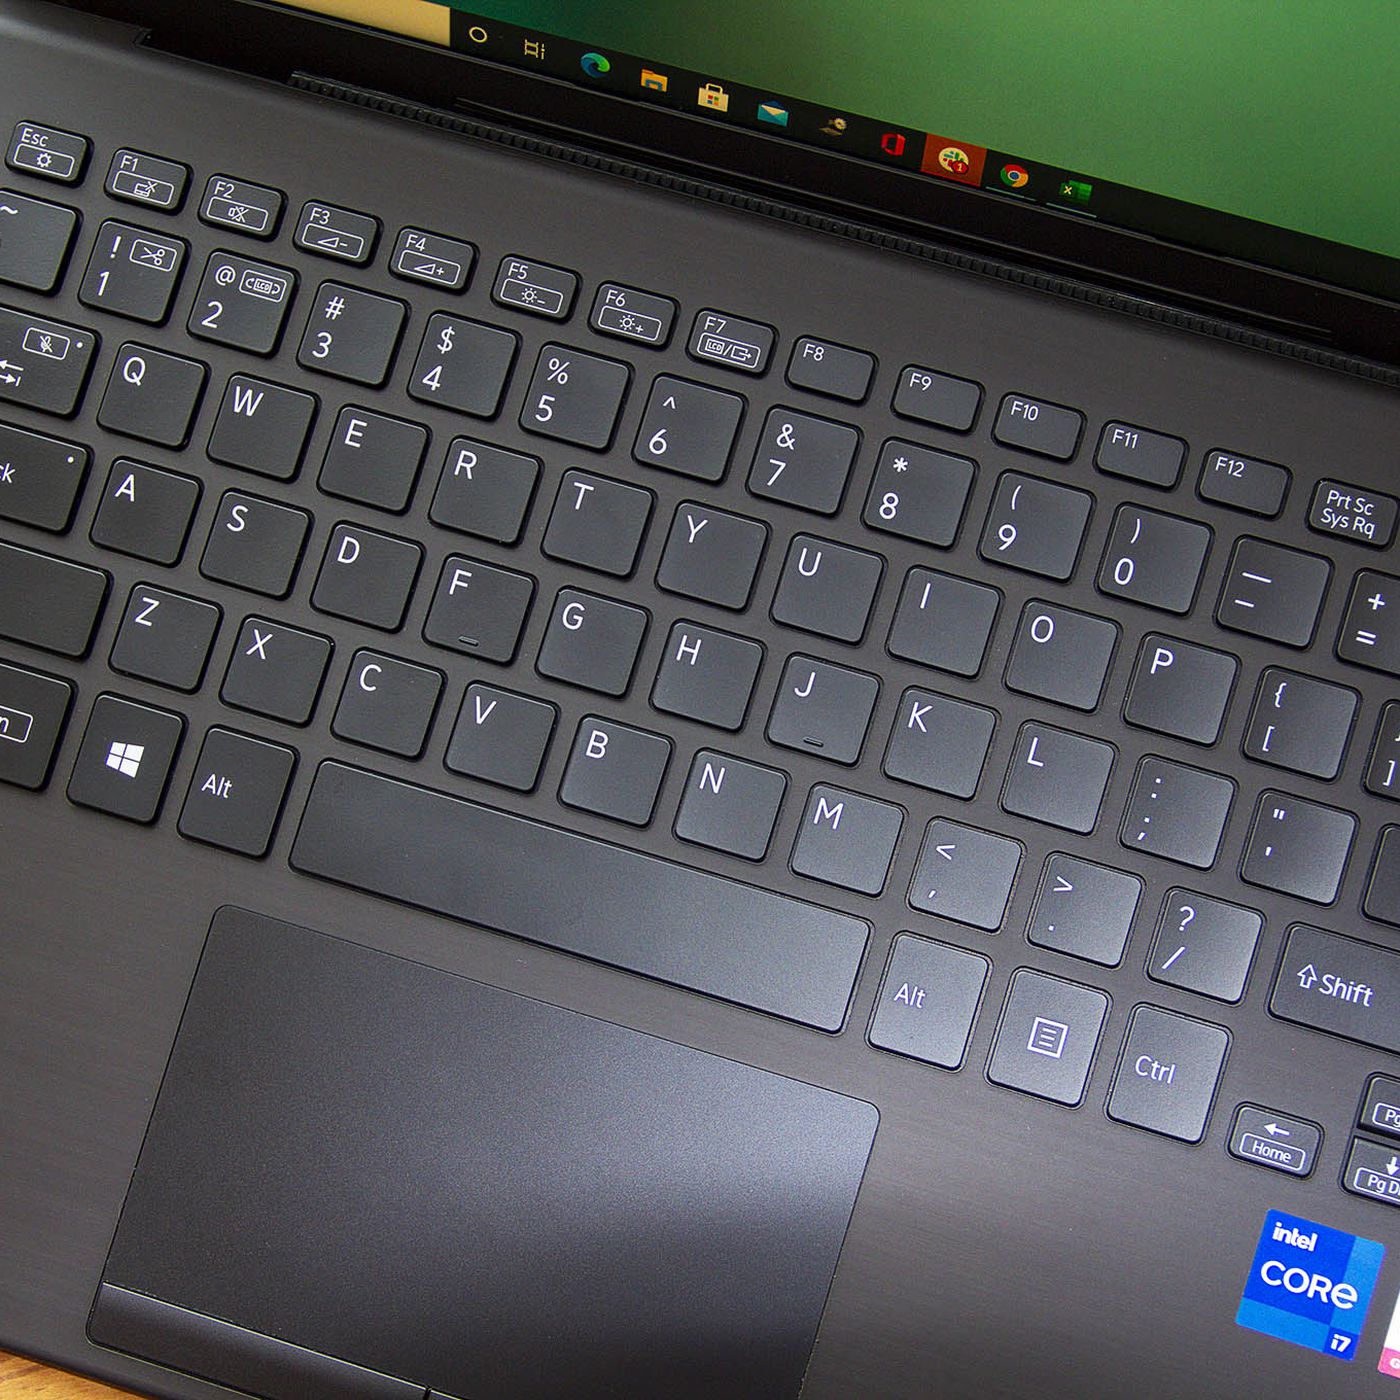 How to type special characters on a Windows PC - The Verge